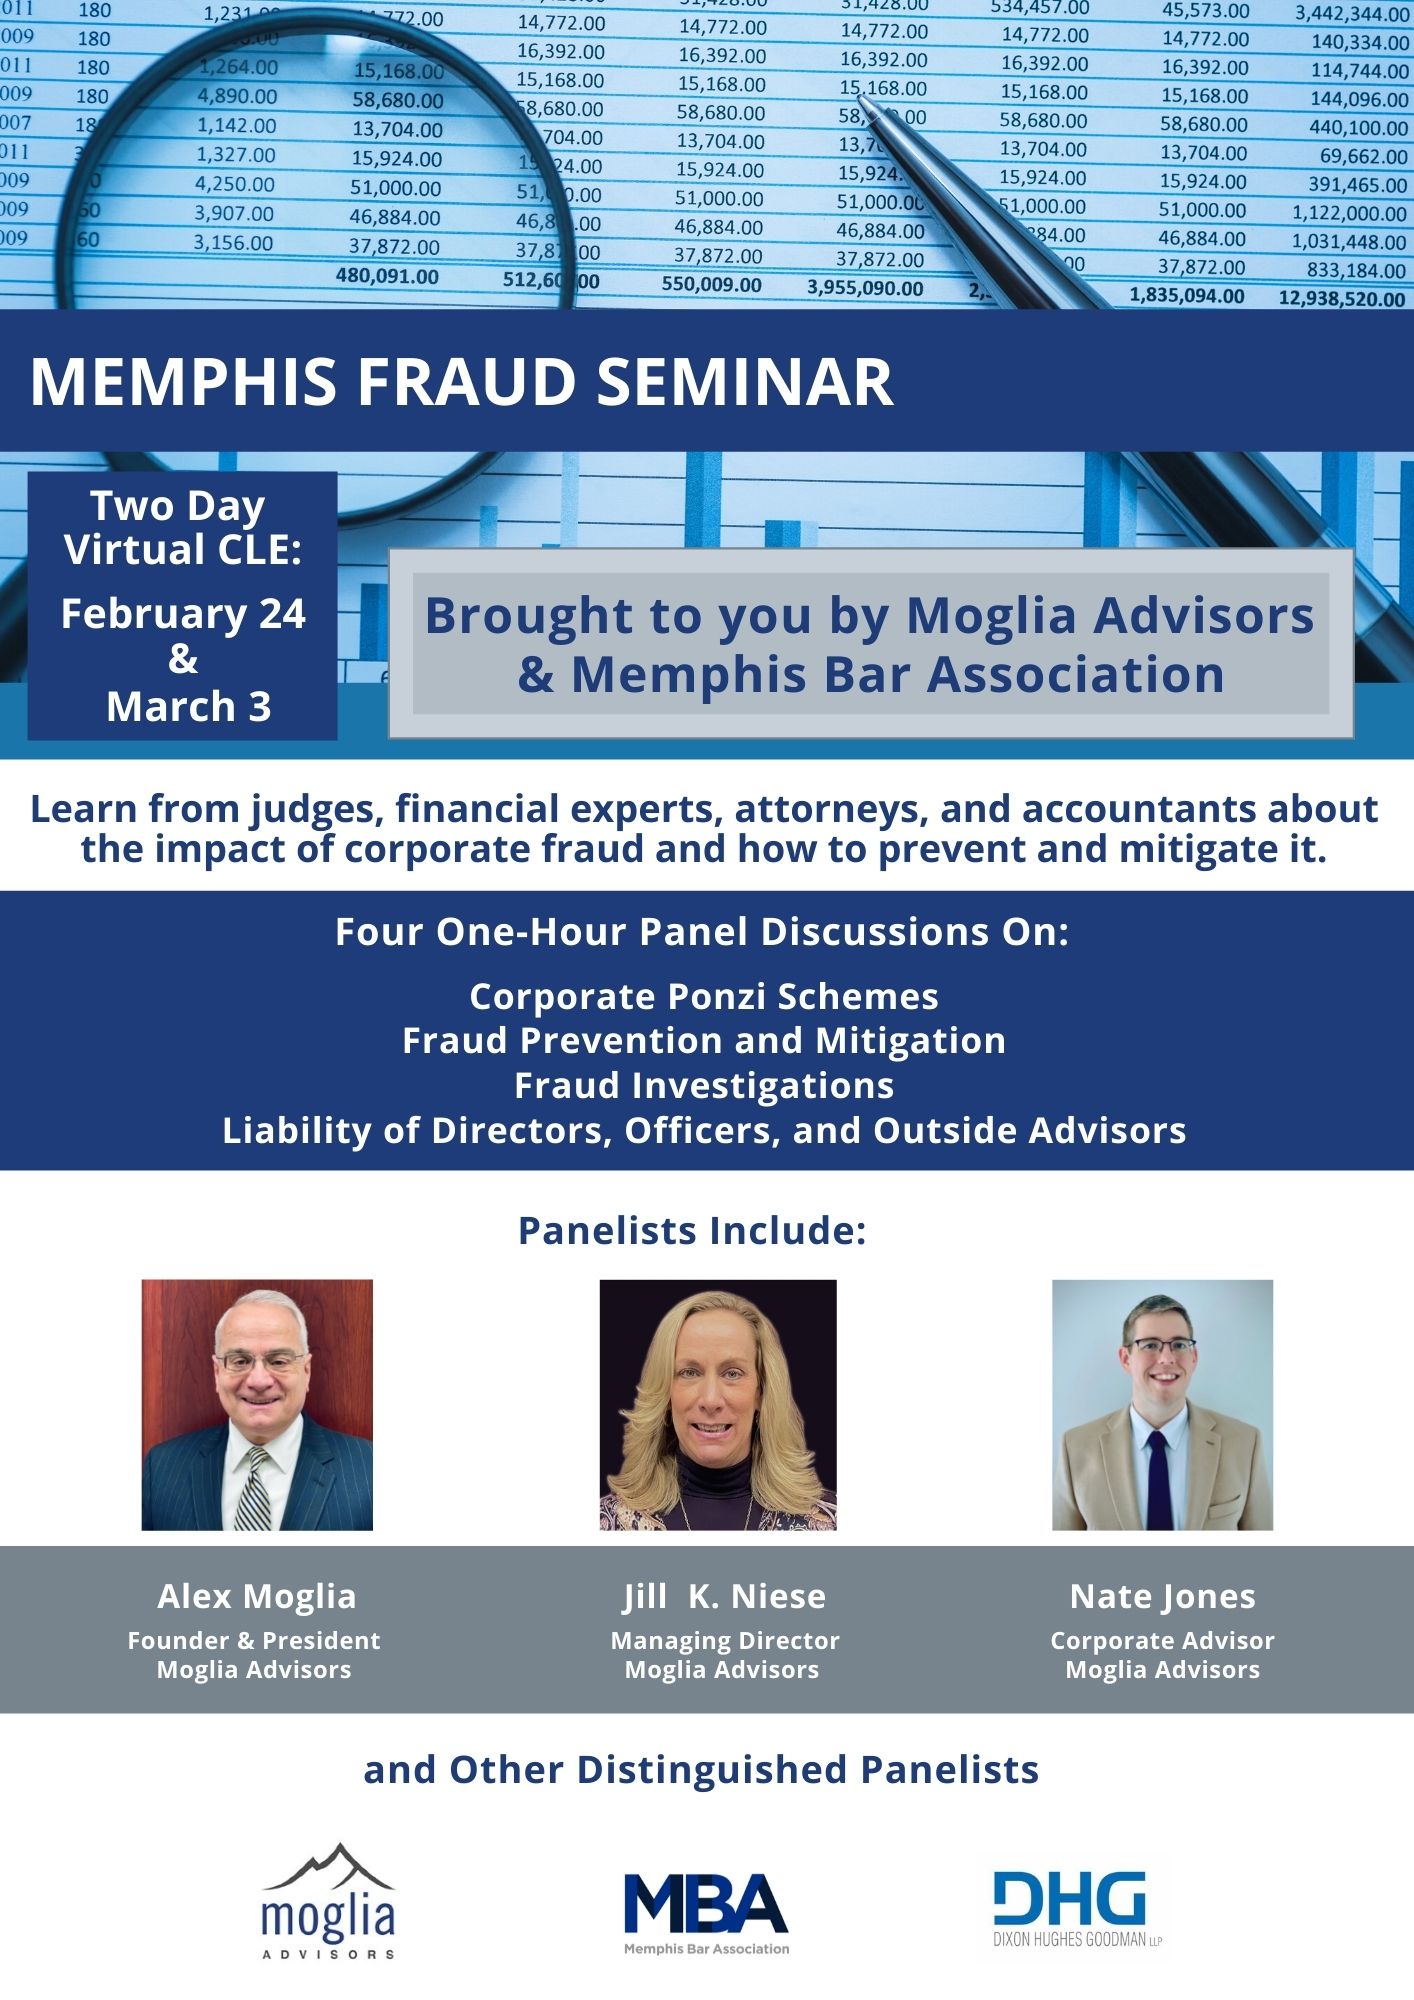 Learn how to prevent and mitigate corporate fraud in this 2-day virtual CLE series on Feb. 24 & March 3, brought to you by Moglia Advisors and the Memphis Bar Association.